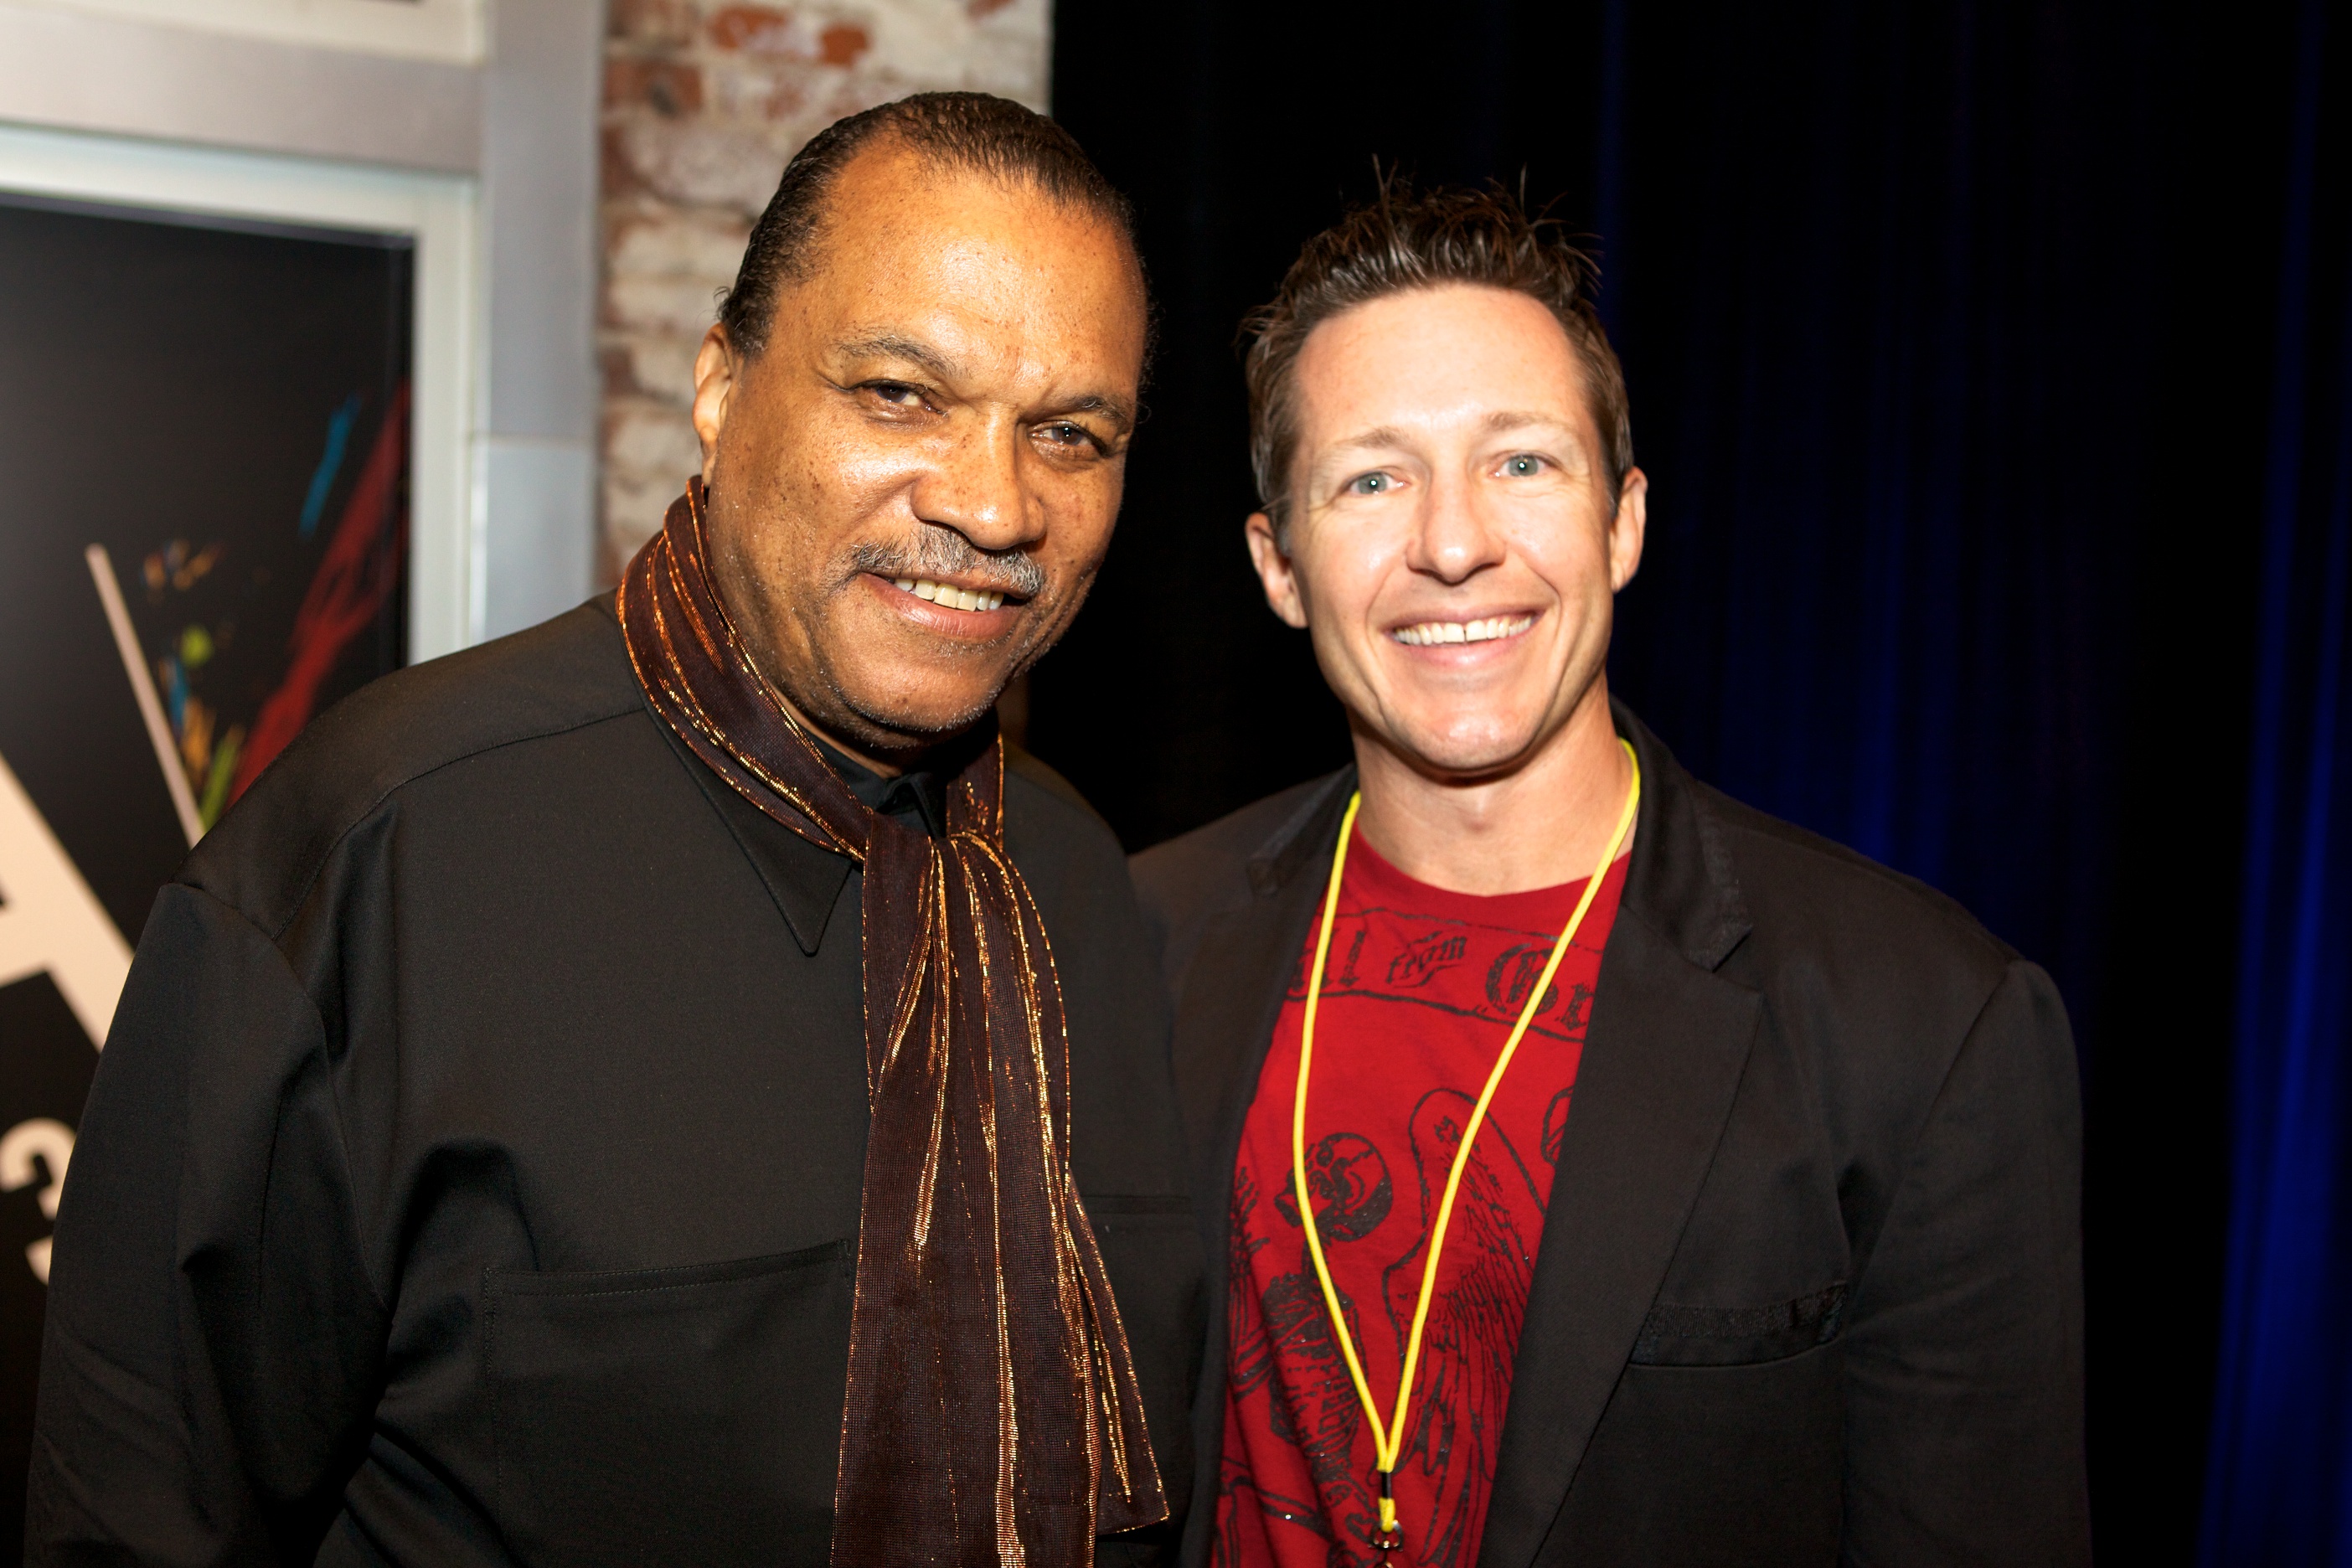 Billy Dee Williams and Tony Armer at Sunscreen Film Festival